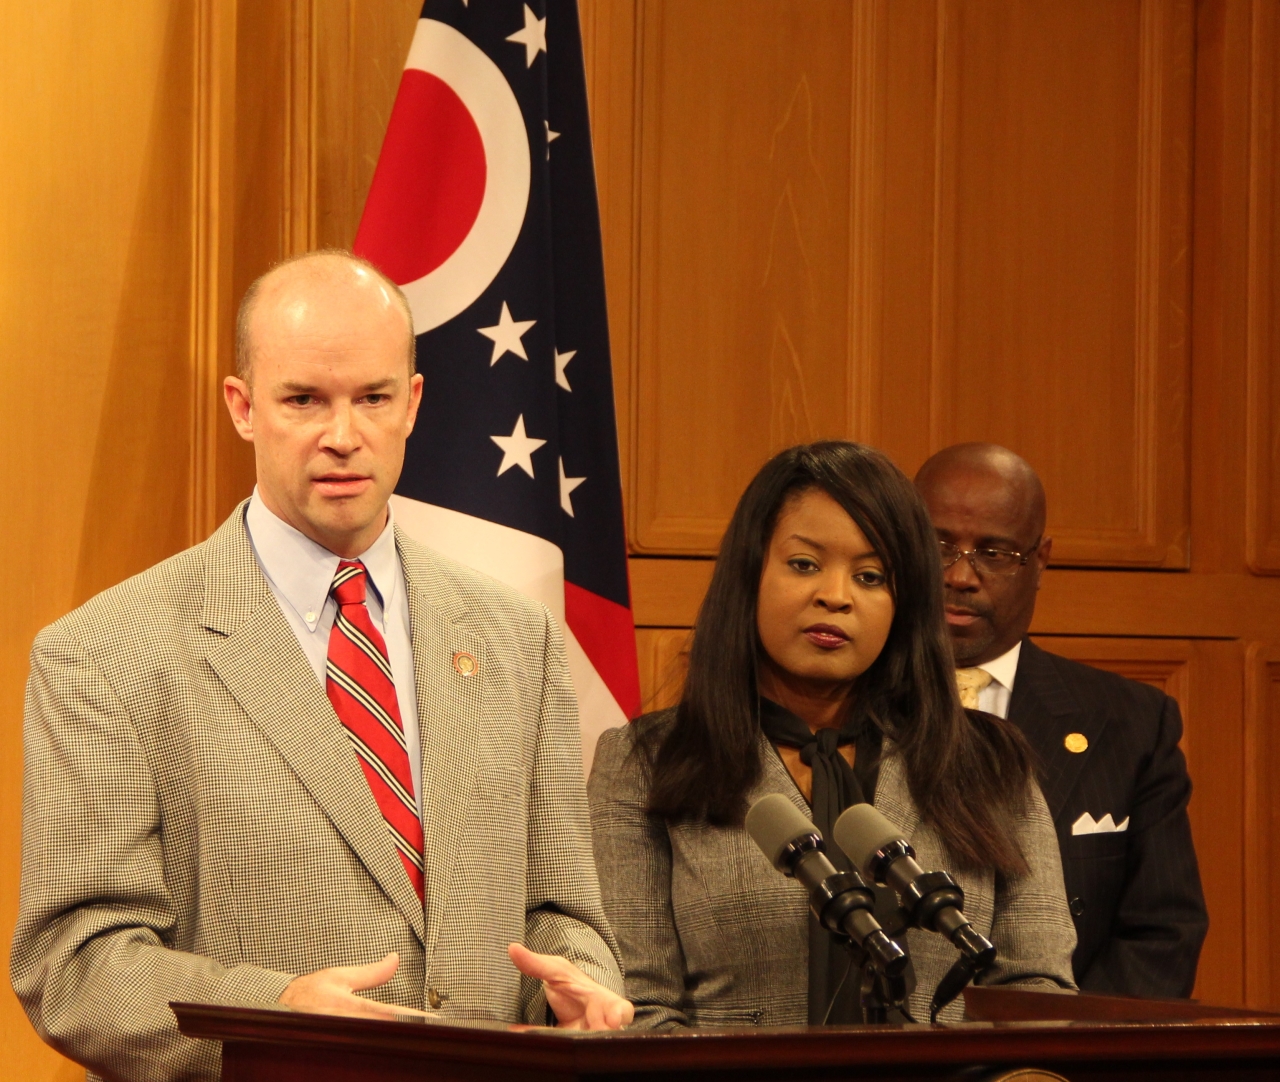 Rep. Dever Discusses Legislation to Provide Transparency in Officer-Involved Death Investigations